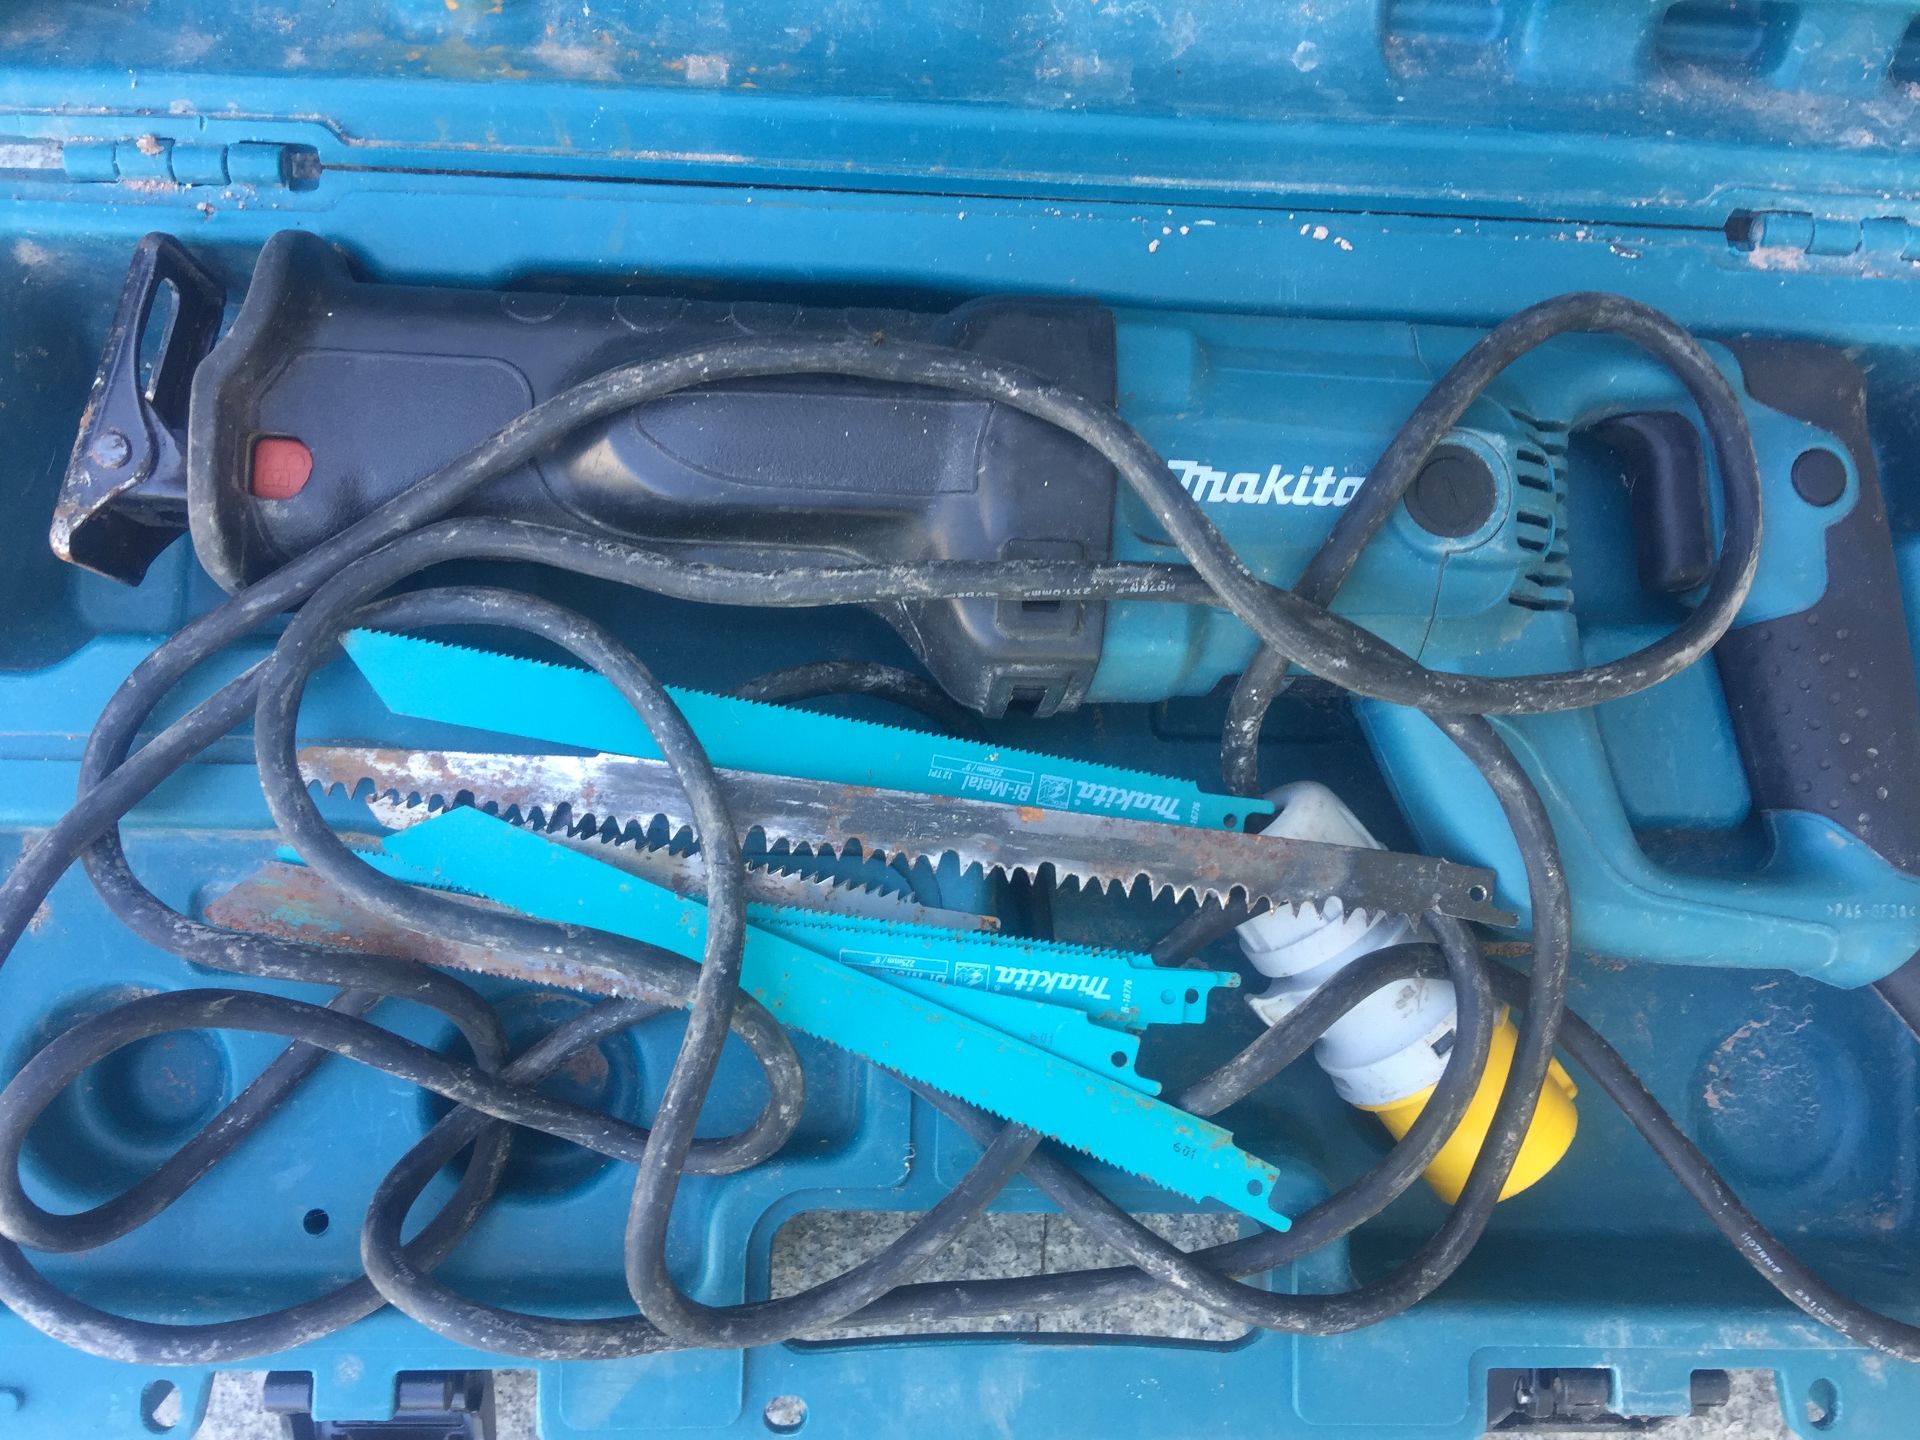 Cased Bosch hammer drill GBH 2-20 D and Makita JR3050T (Burton-upon-Trent) - Image 2 of 3